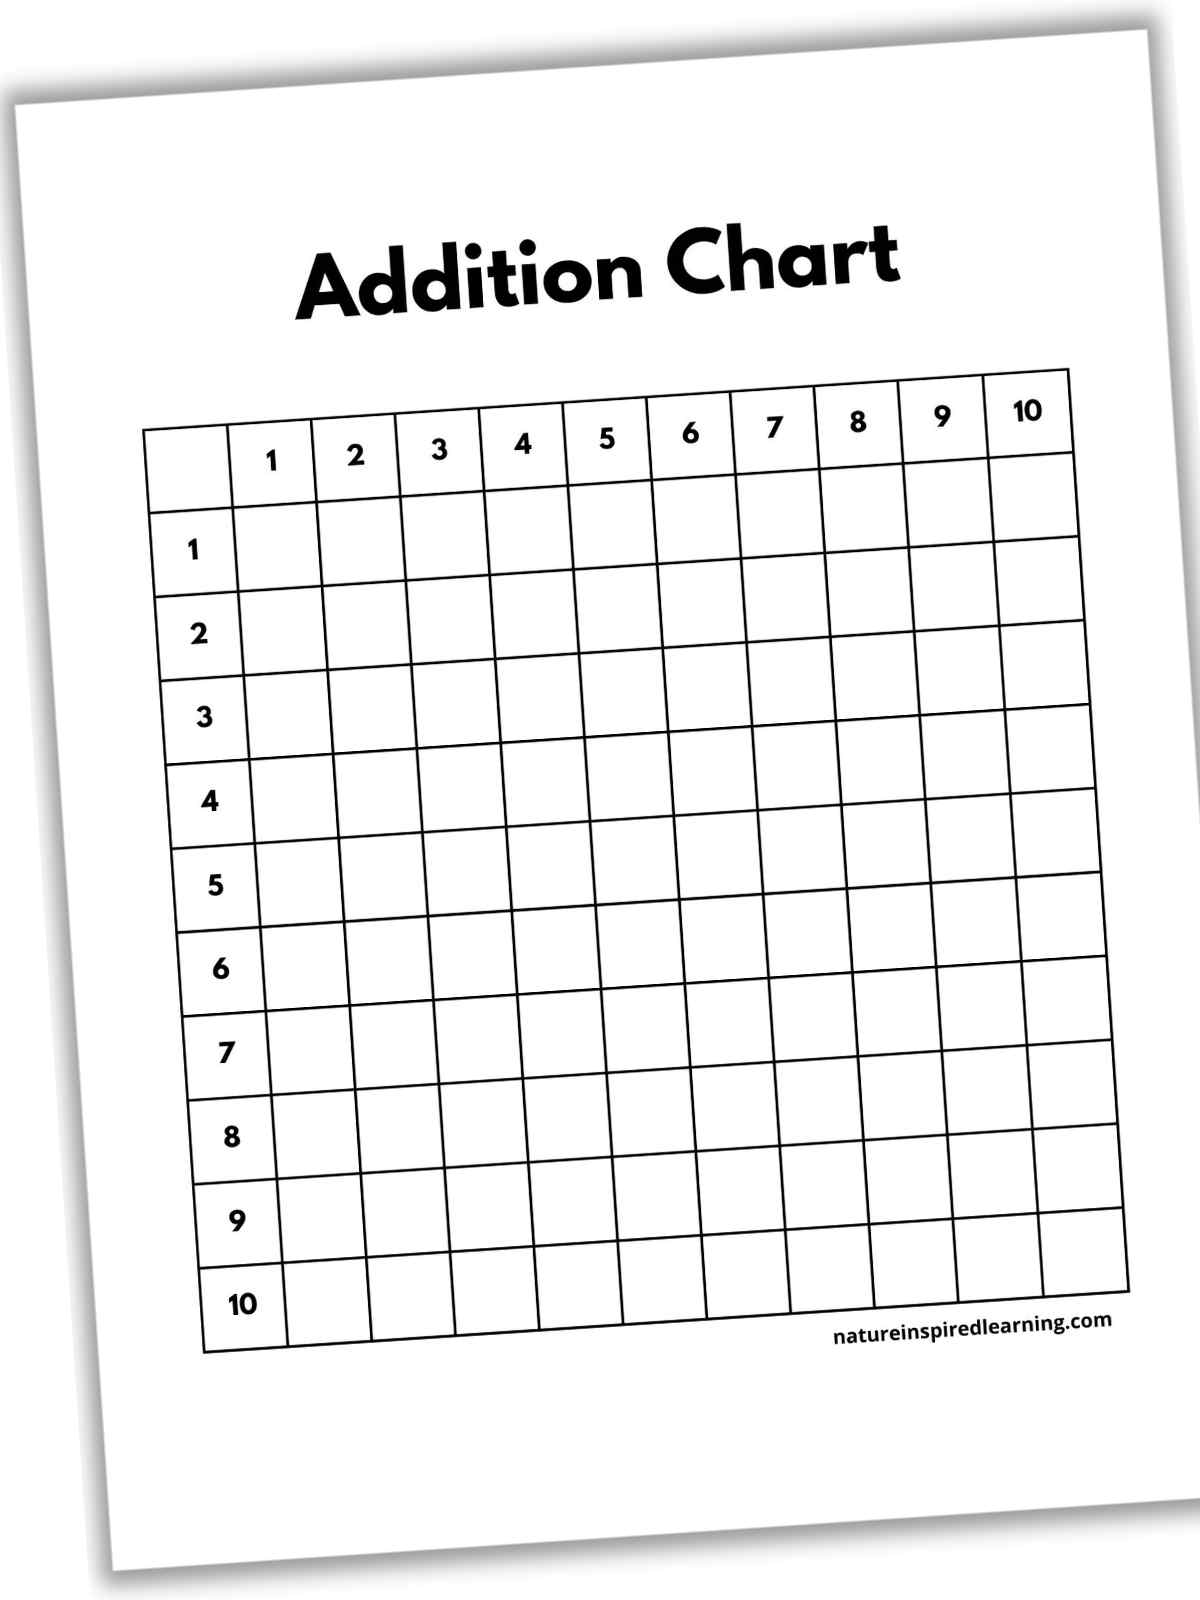 blank black and white addition chart with numbers 1 through 10